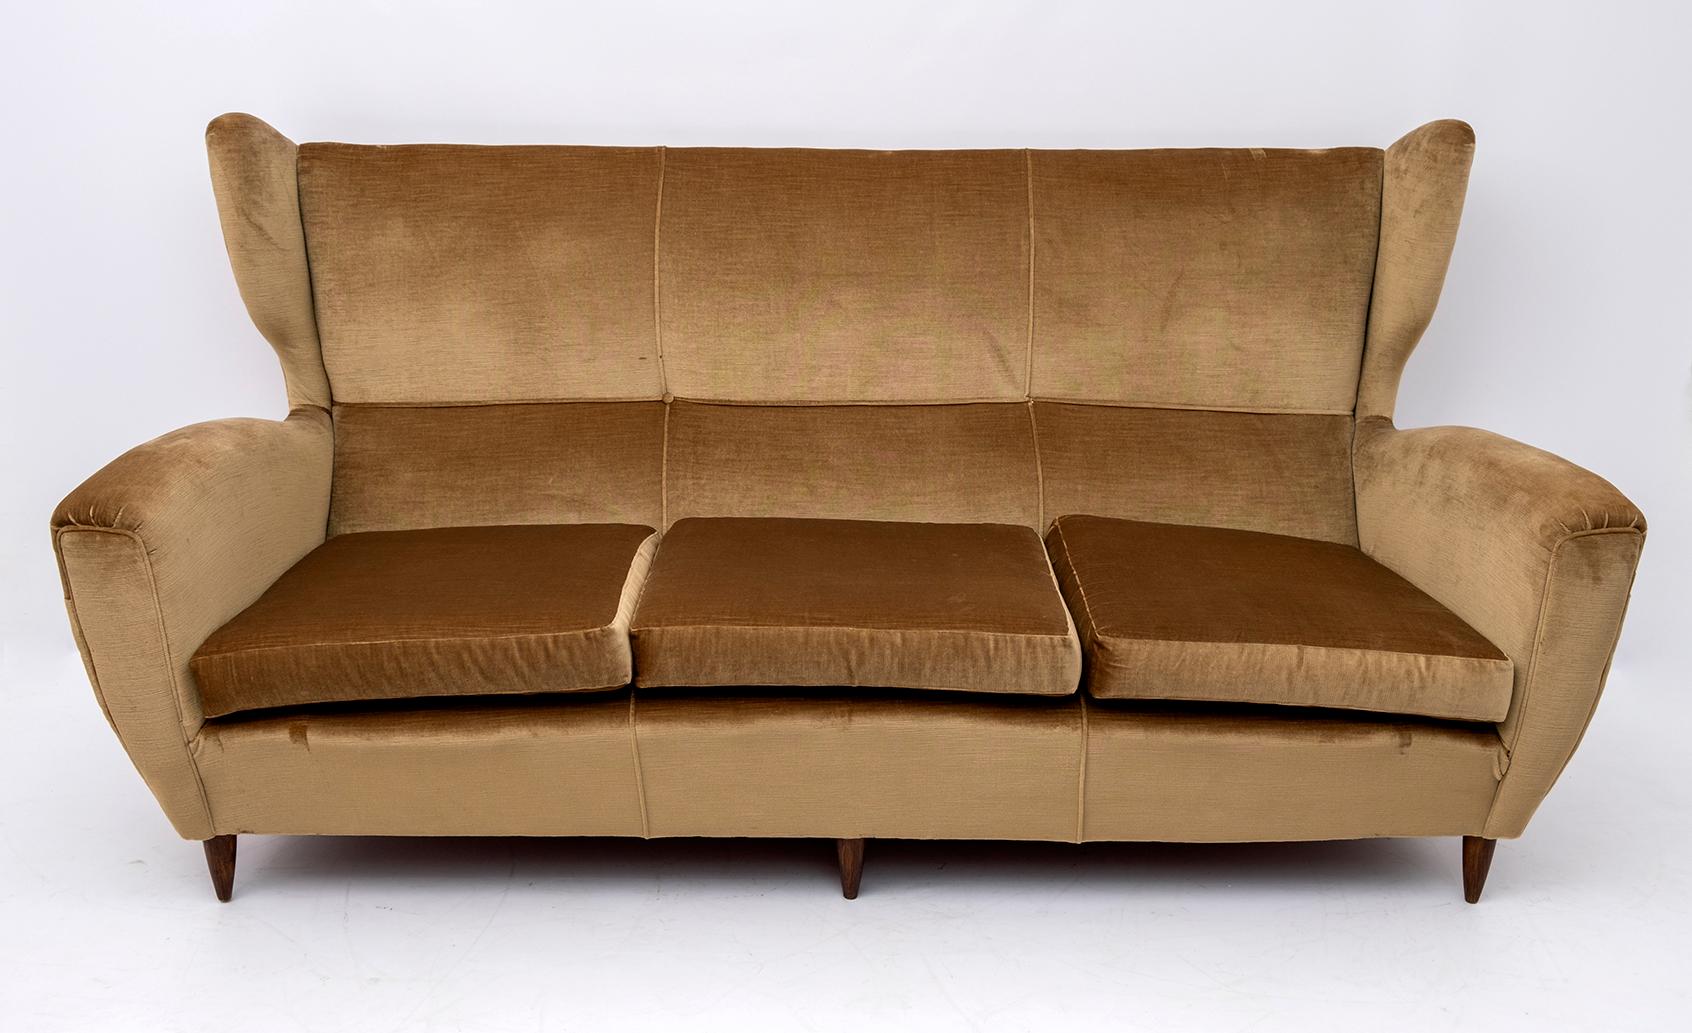 Three-seater sofa attributed Gio Ponti, production in the early 1950s, with high backrest, the upholstery is in velvet but replacement is recommended, feet and structure in beech.